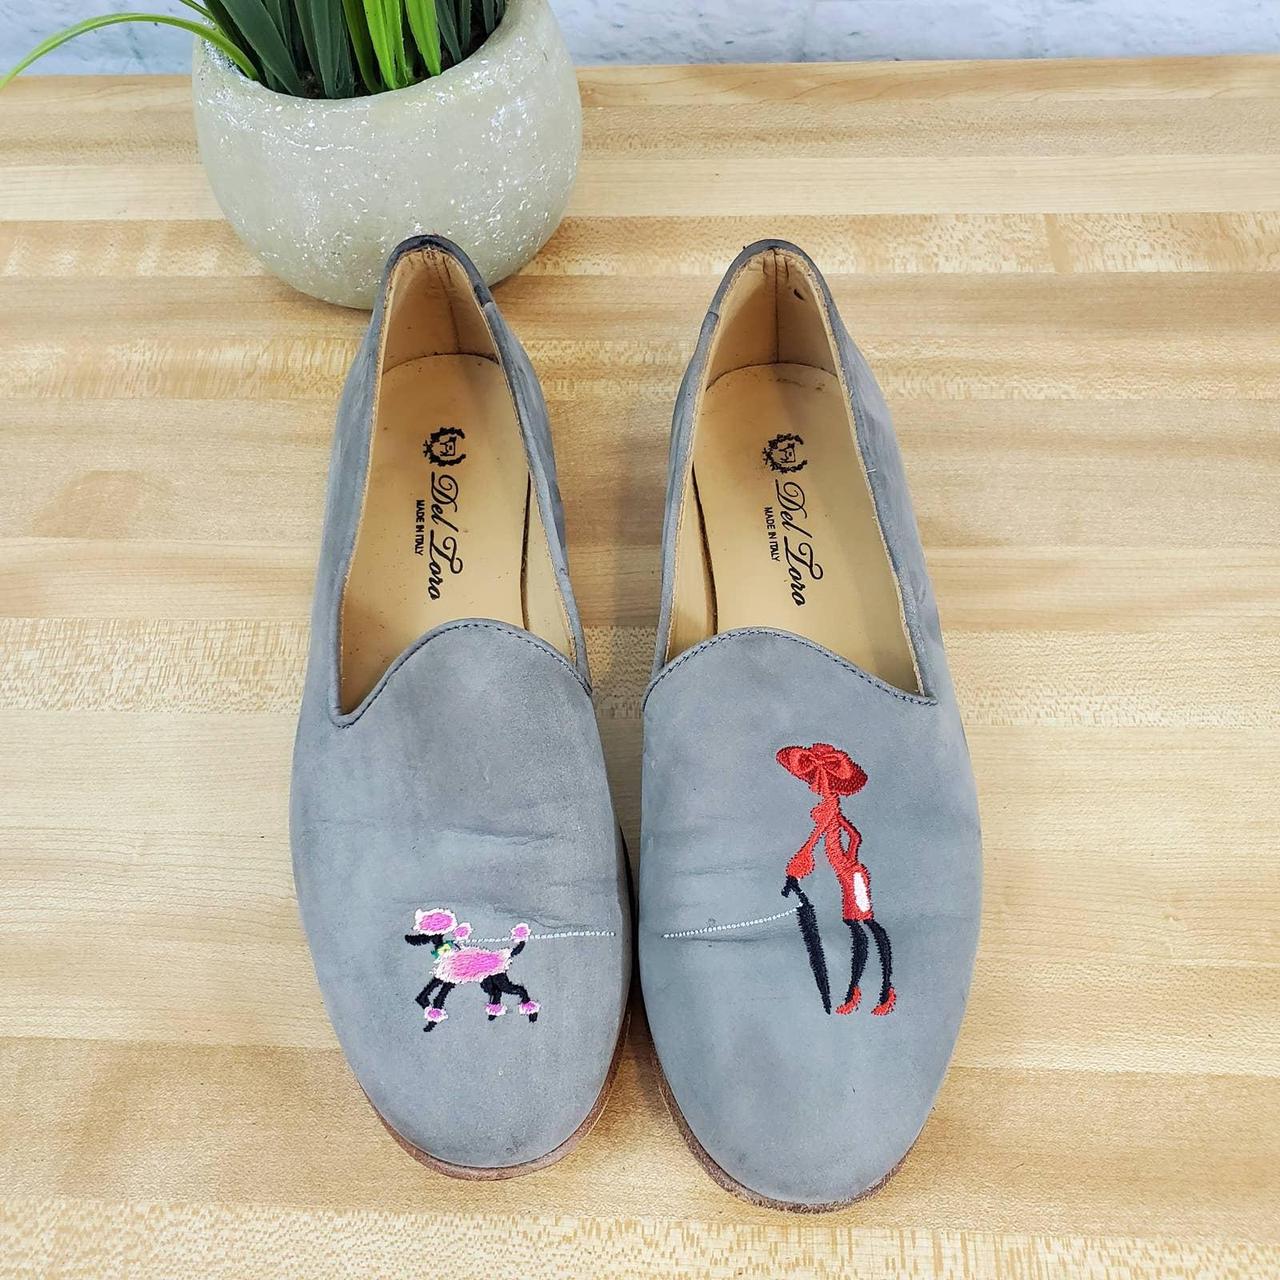 Del Toro Women's Grey and Red Loafers